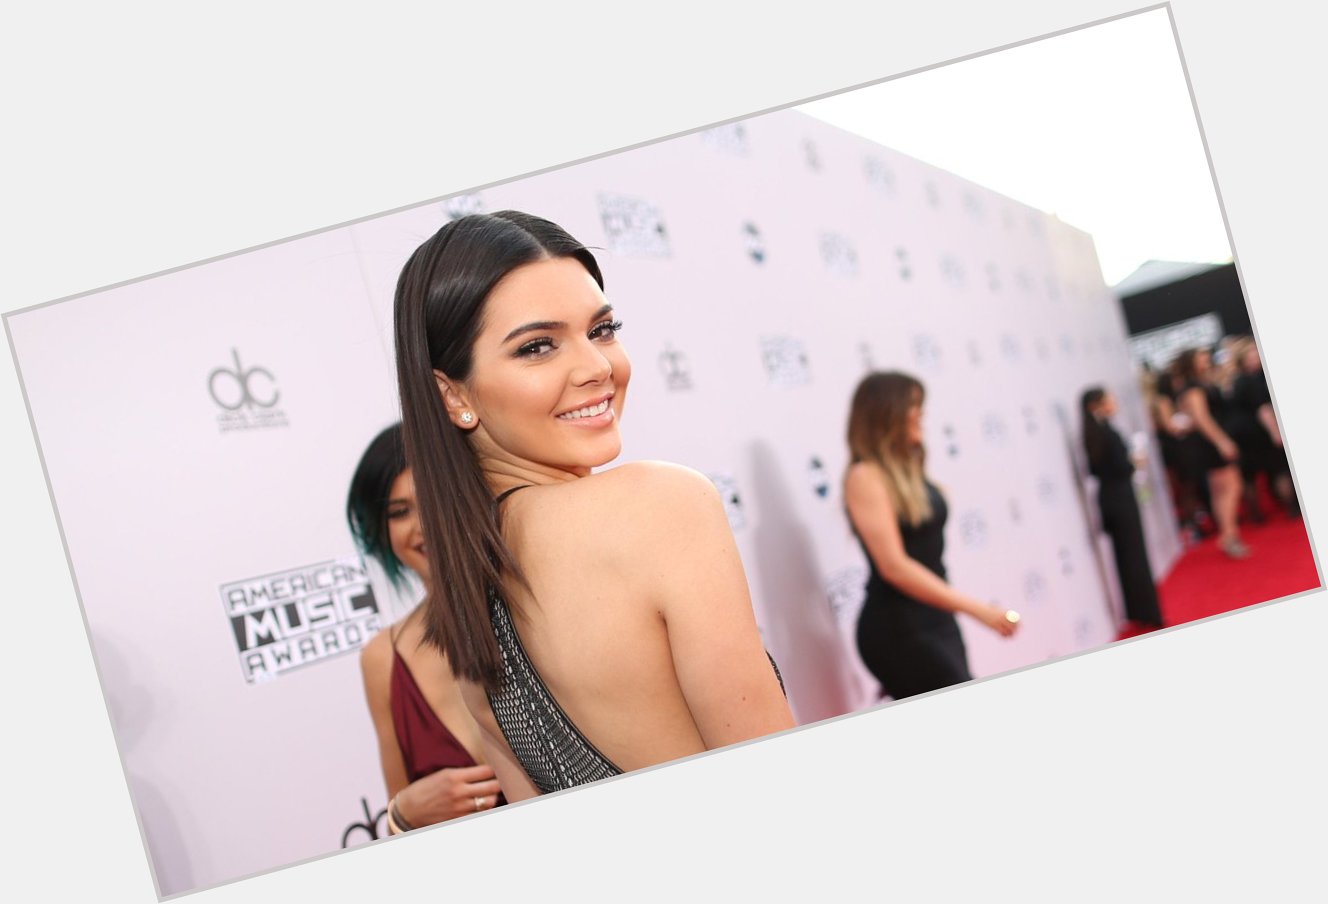 Couldn\t end the day without wishing our fave, Kendall Jenner, a very Happy Birthday! 